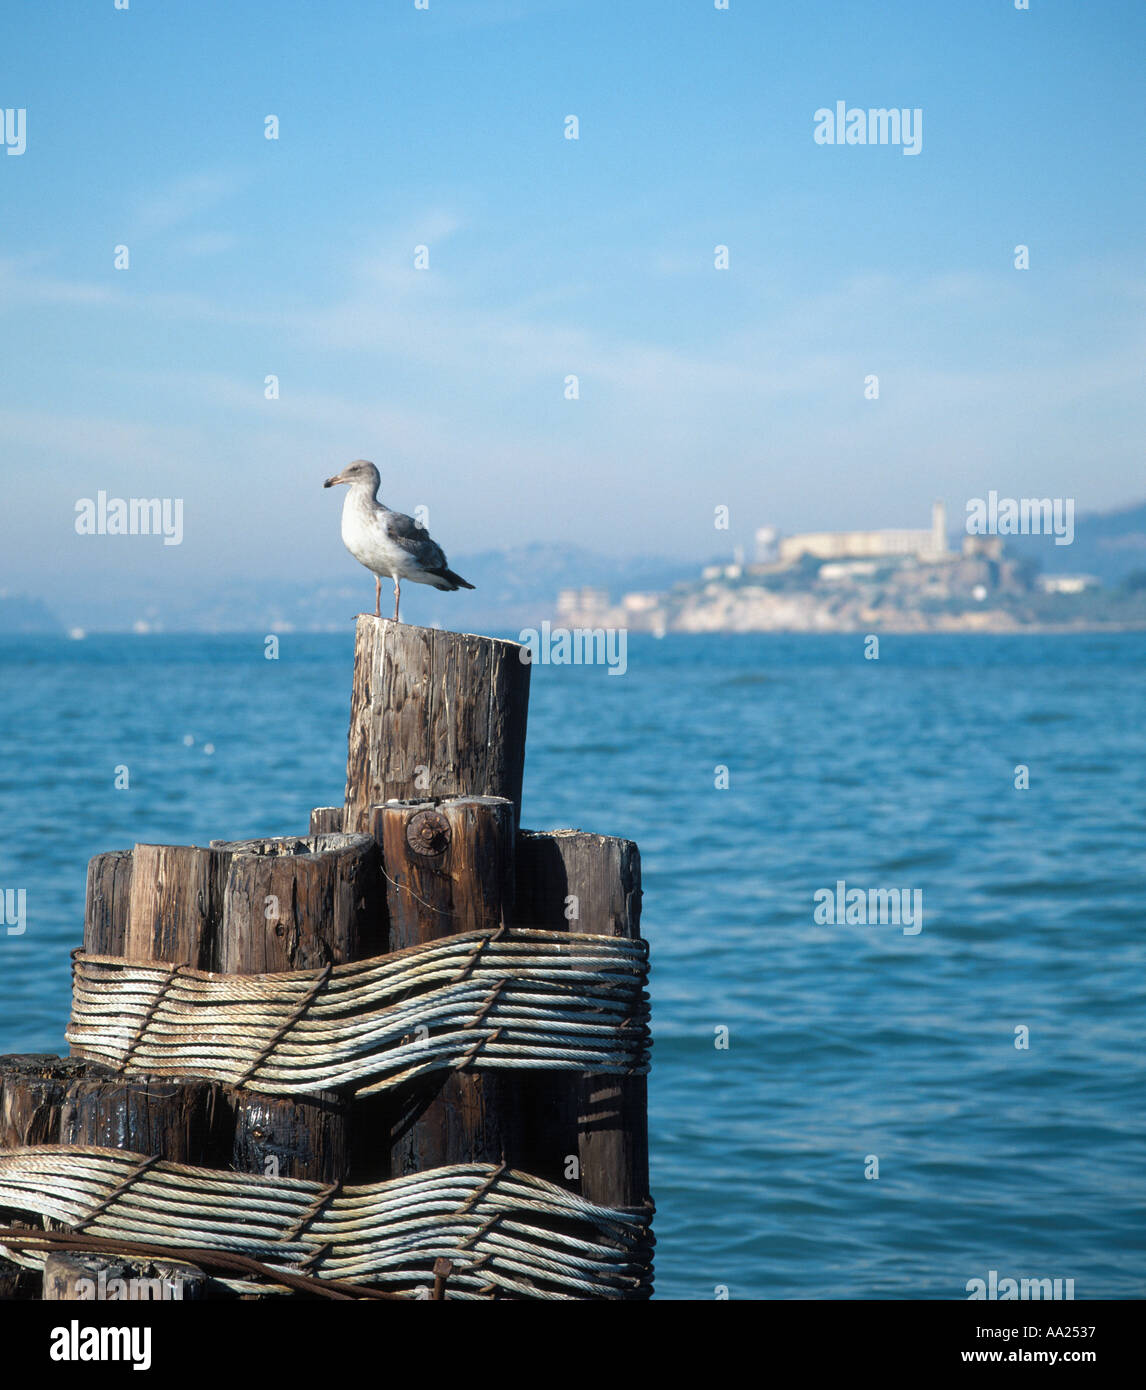 Seagull on a piling with Alcatraz behind, taken from Fishermans Wharf, San Francisco, California, USA Stock Photo